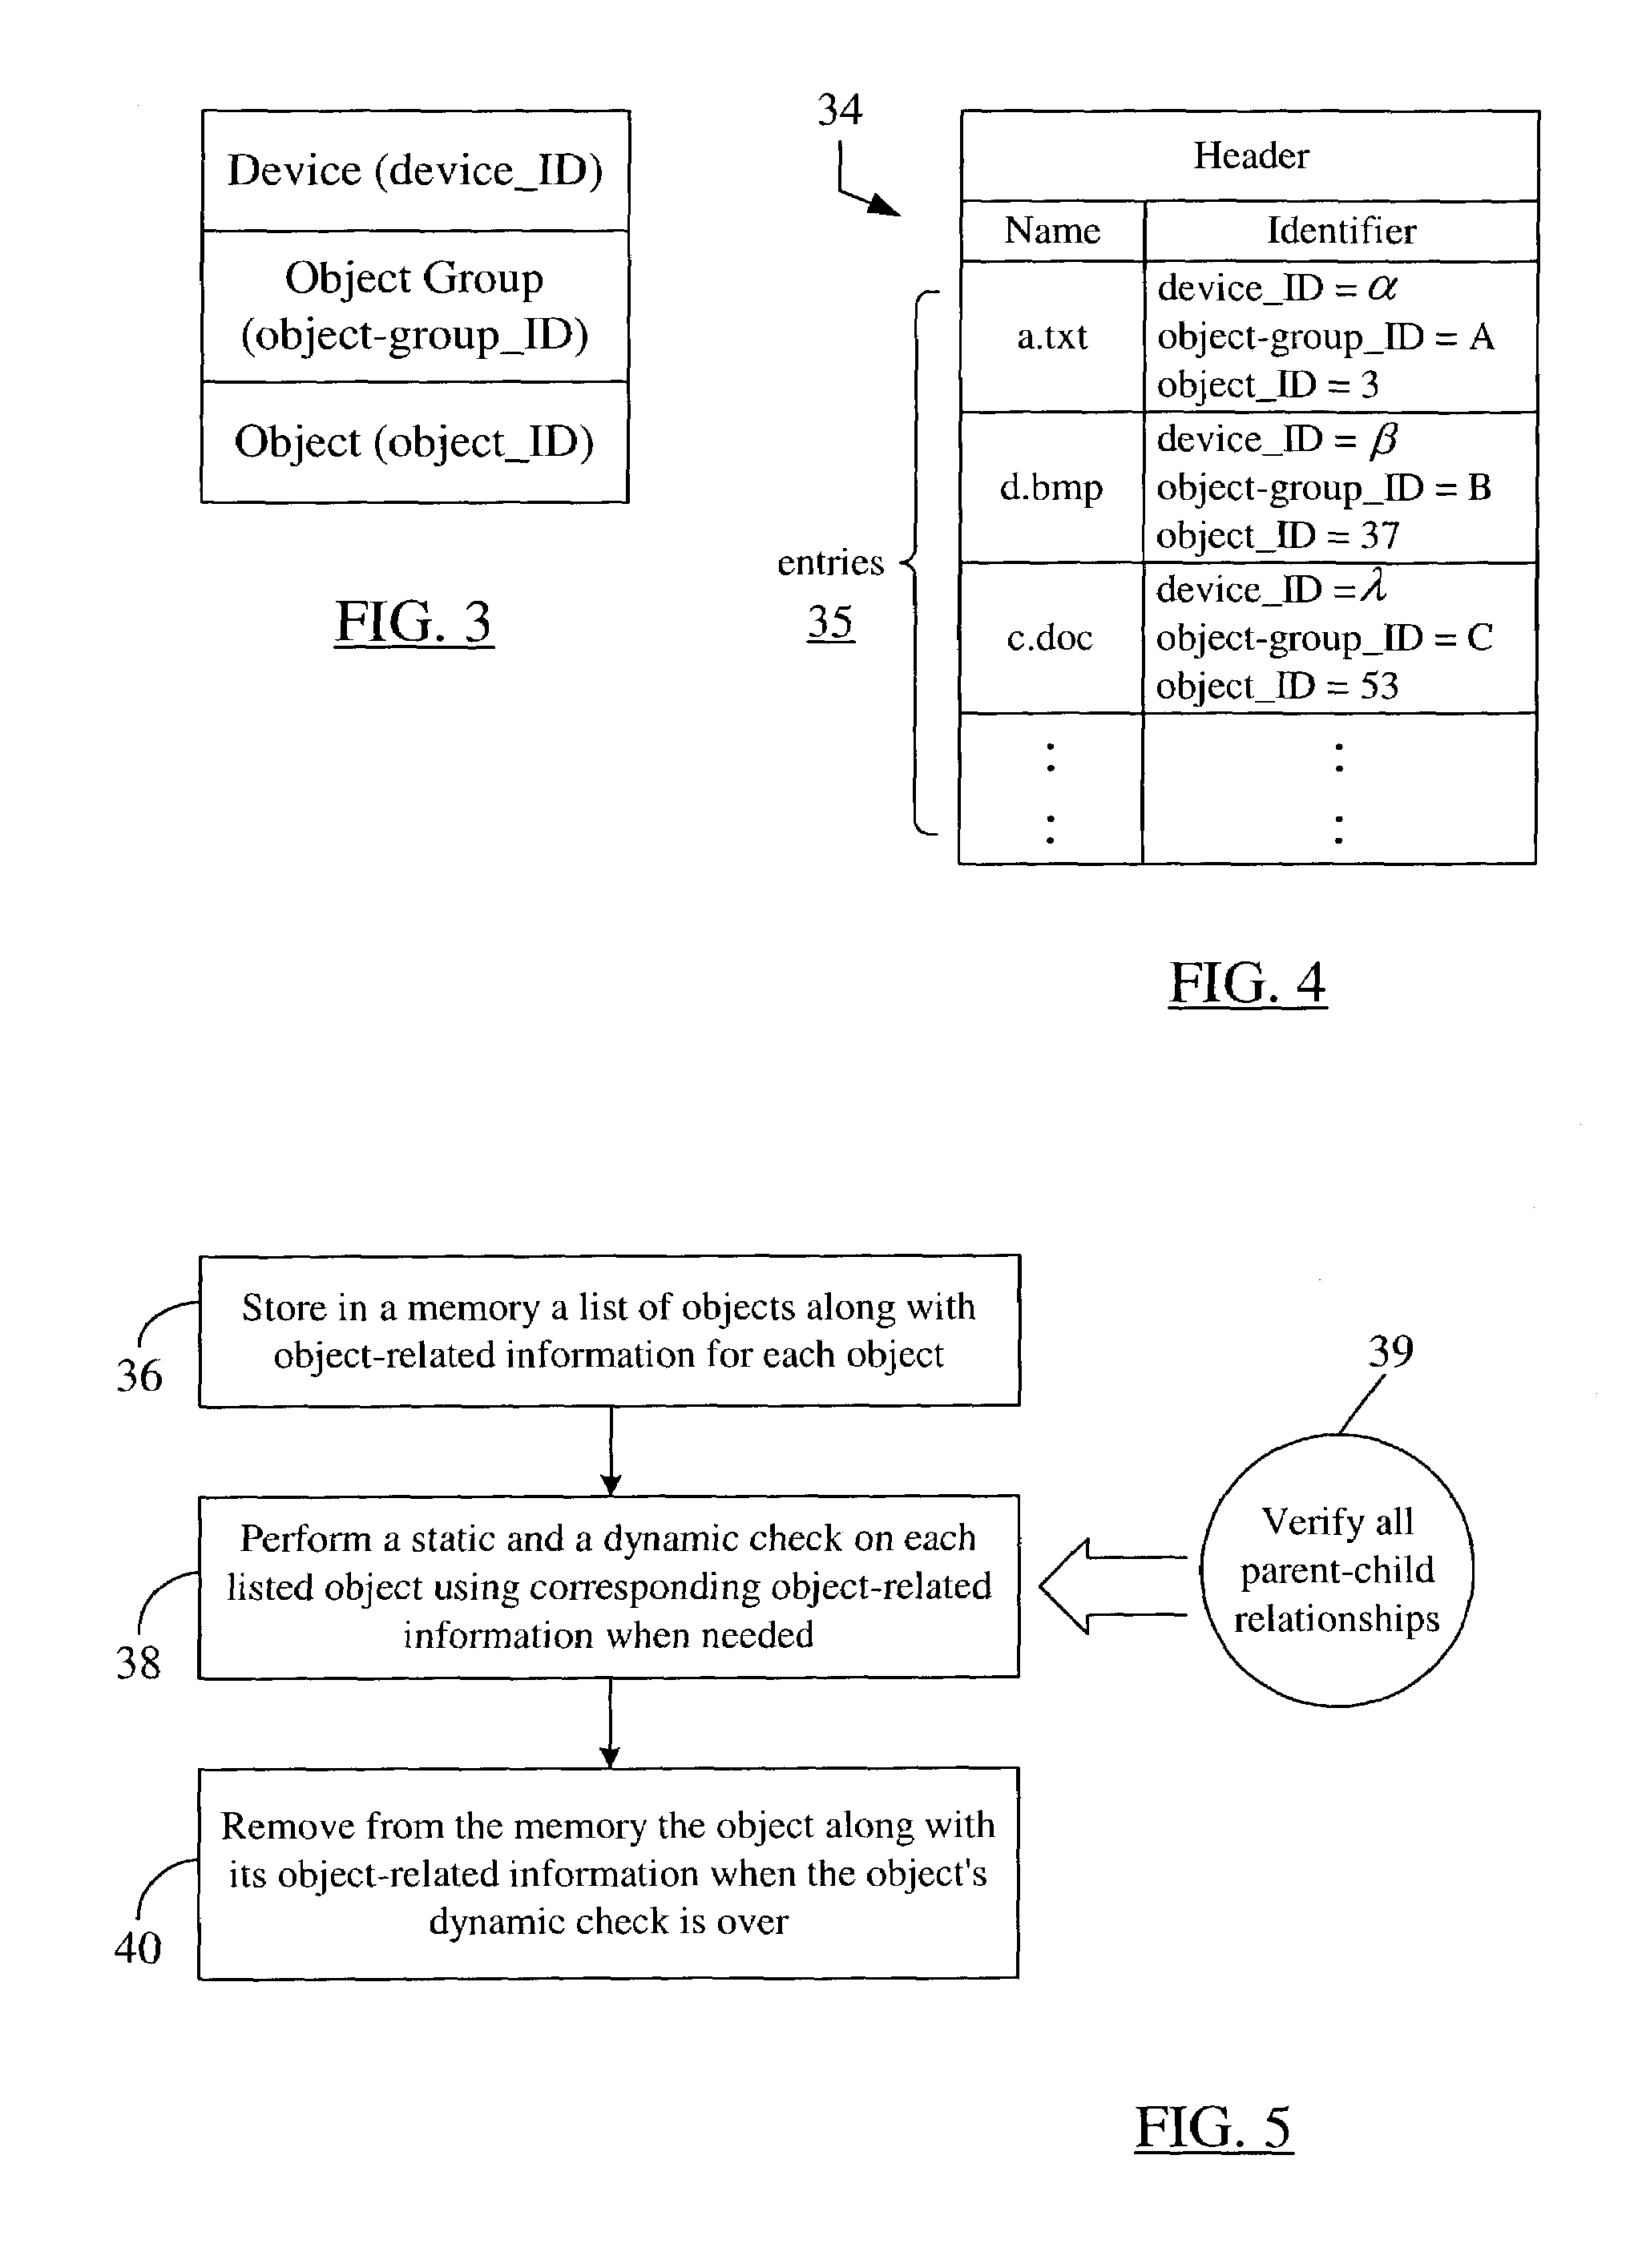 Recovering and checking large file systems in an object-based data storage system